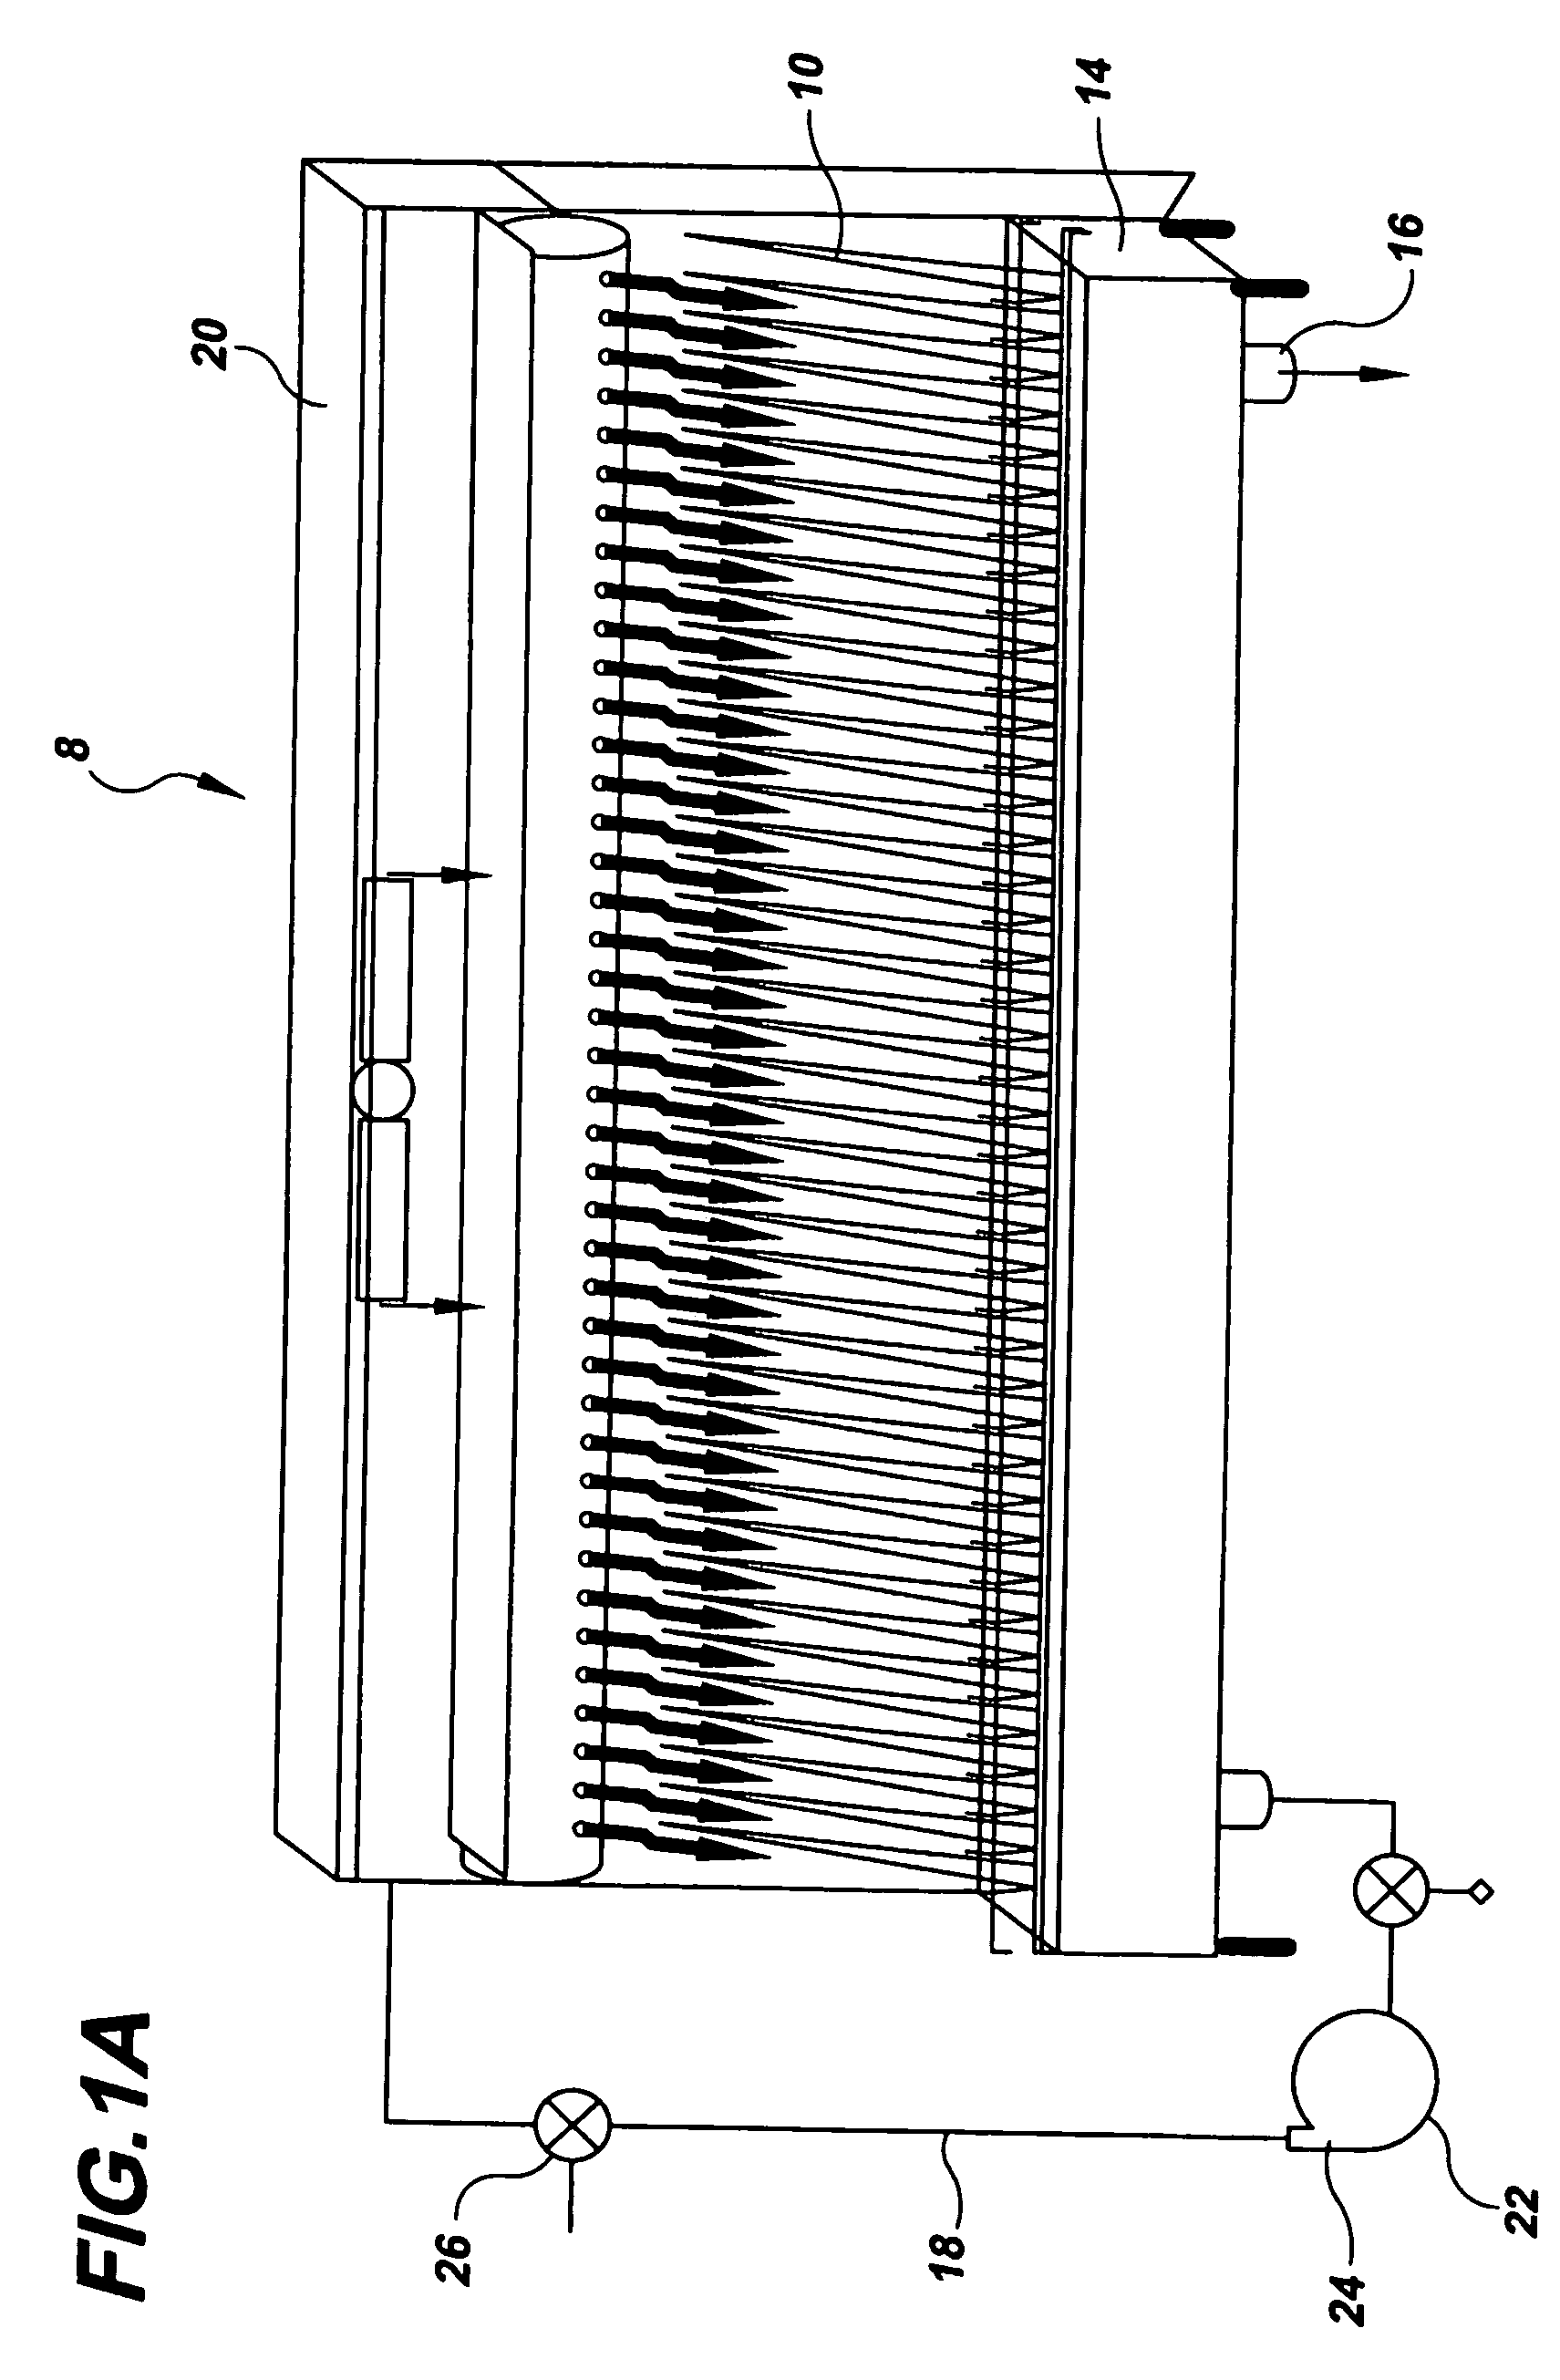 Bench scale apparatus to model and develop biopharmaceutical cleaning procedures